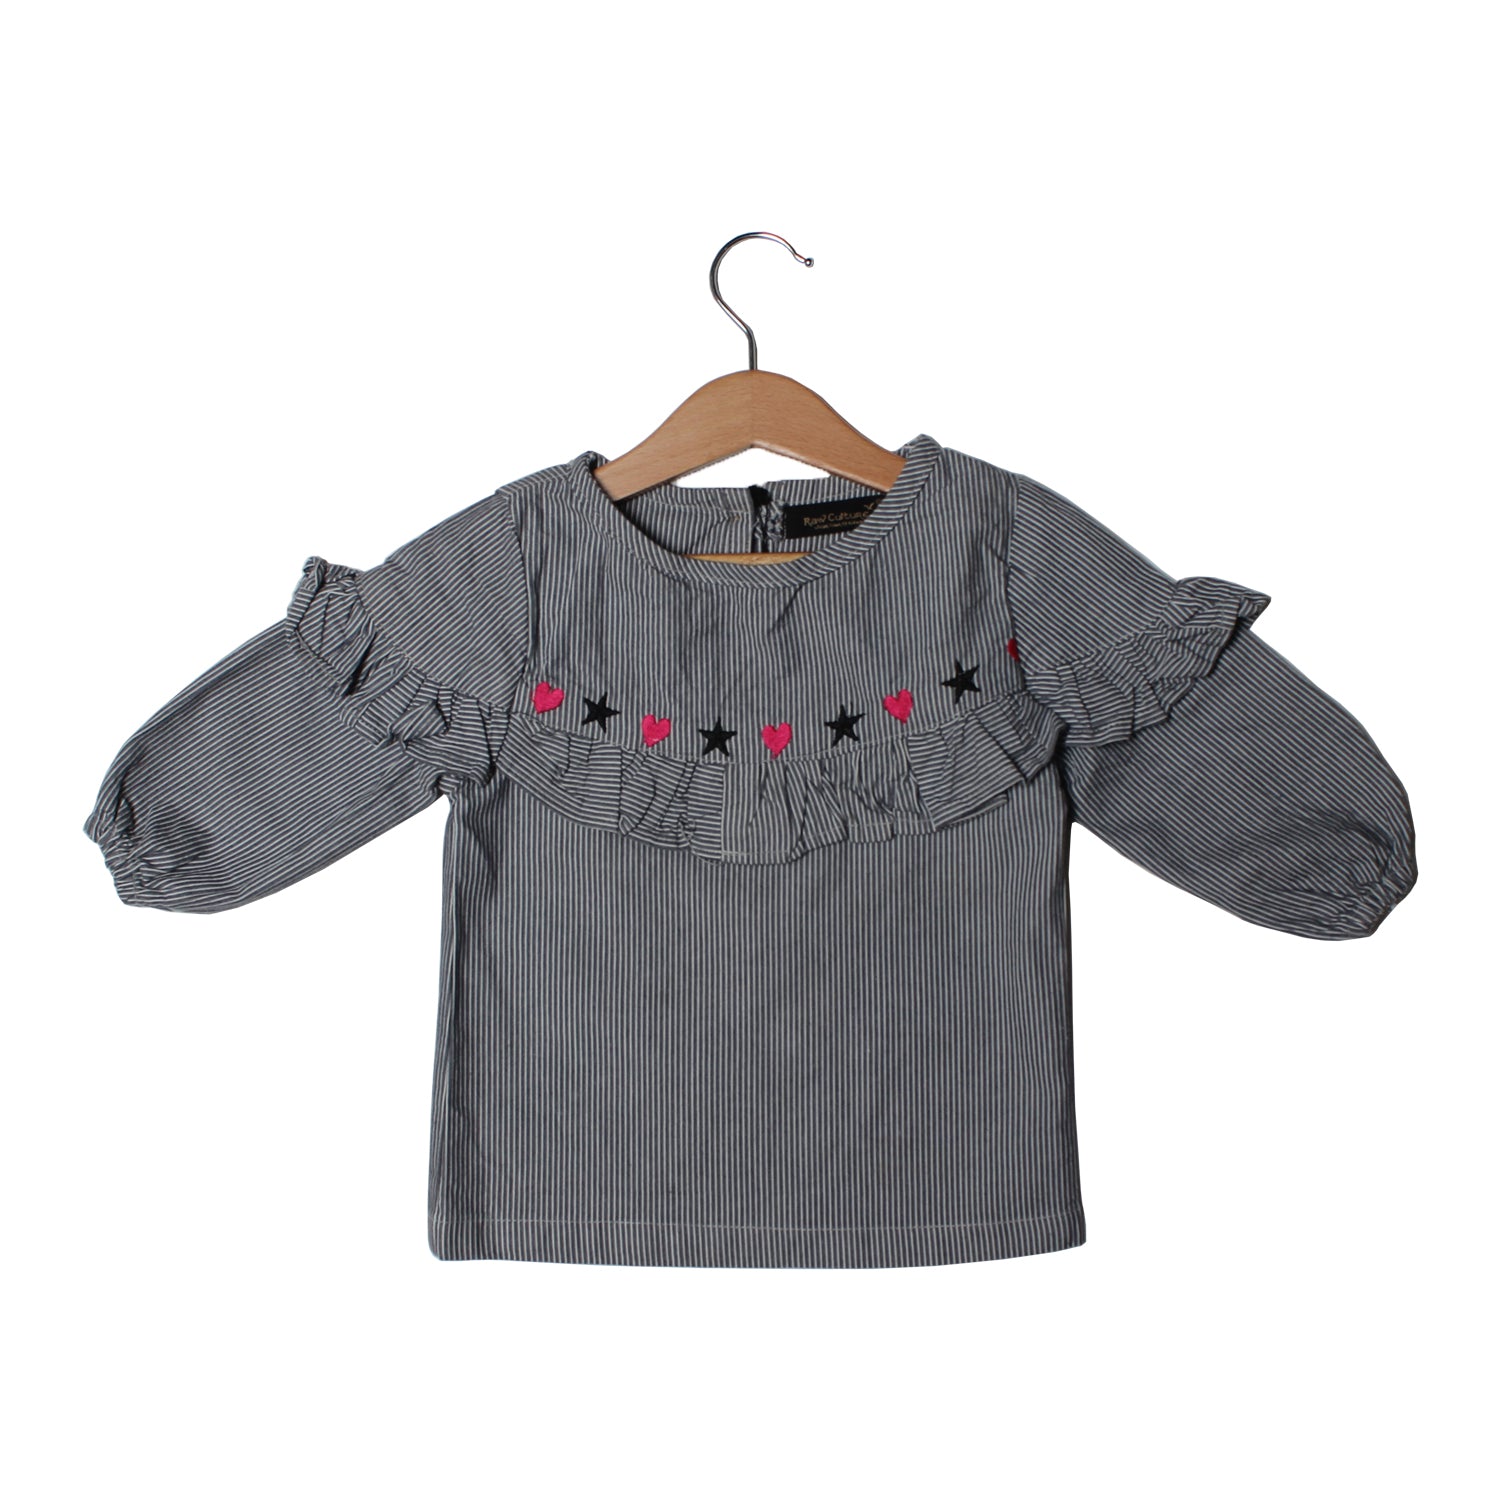 NEW GREY WITH STRIPES HEART & STARS PRINTED TOP FOR GIRLS